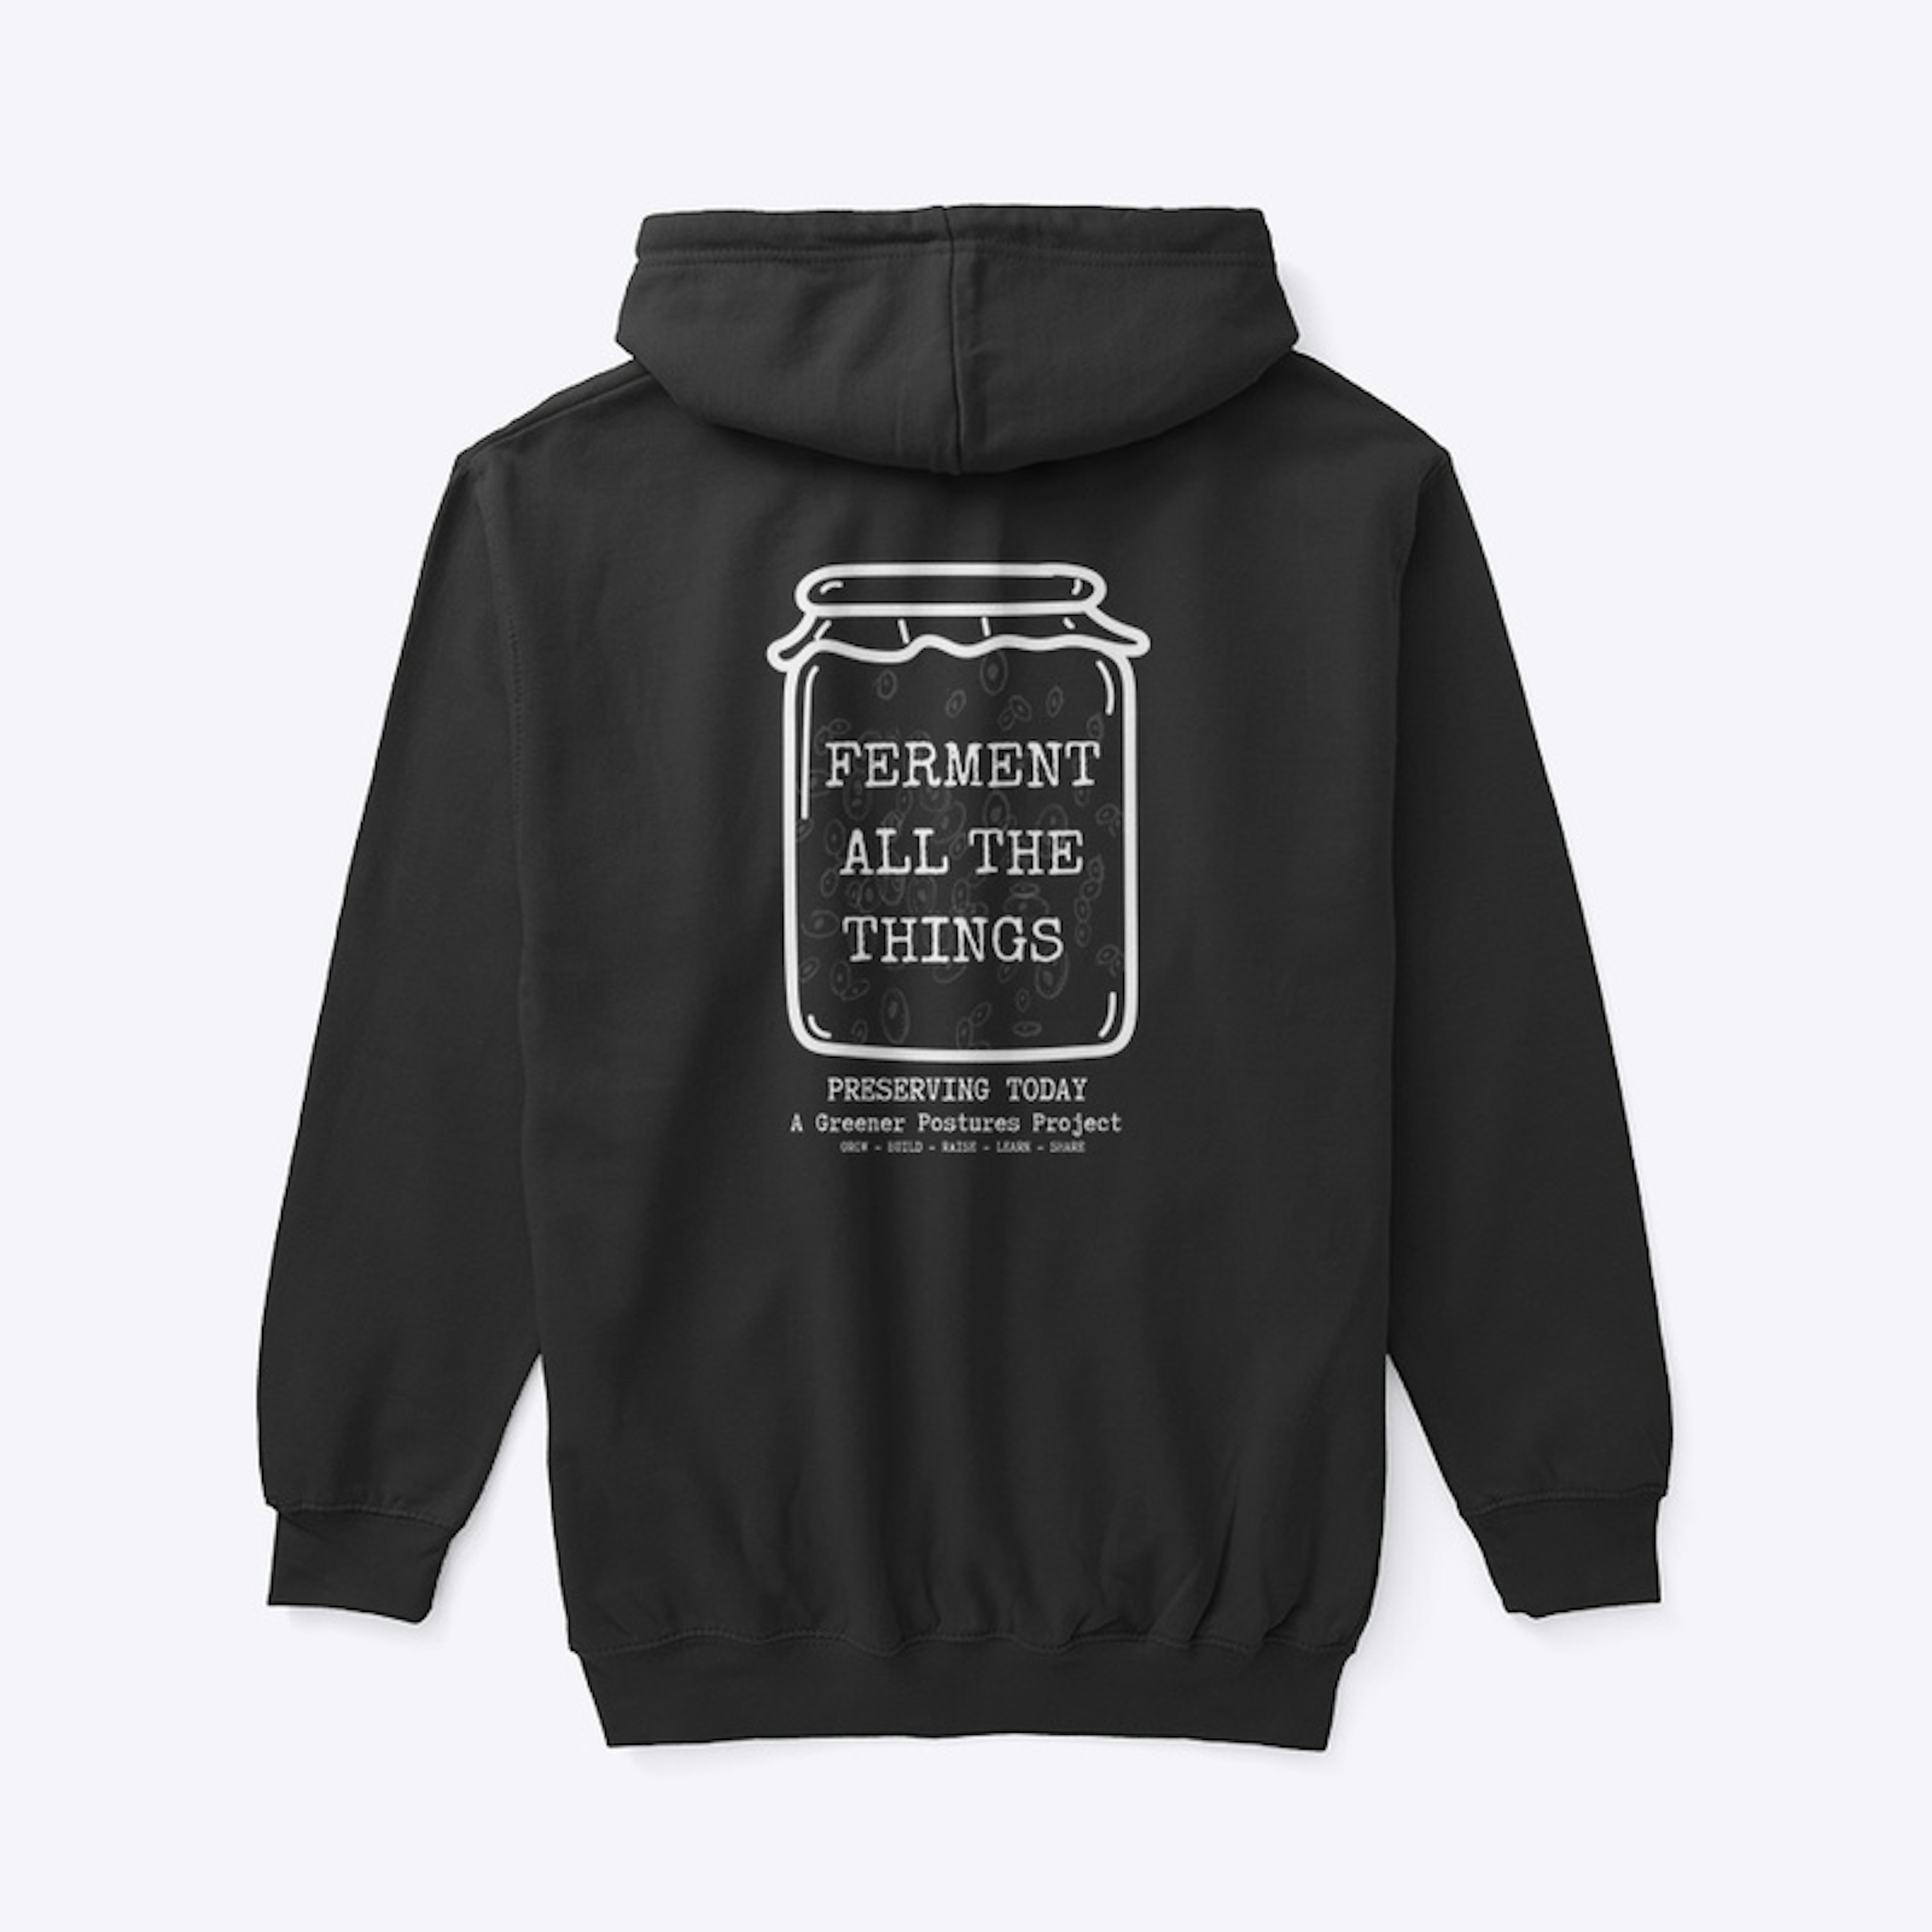 Can & Ferment Hoodie